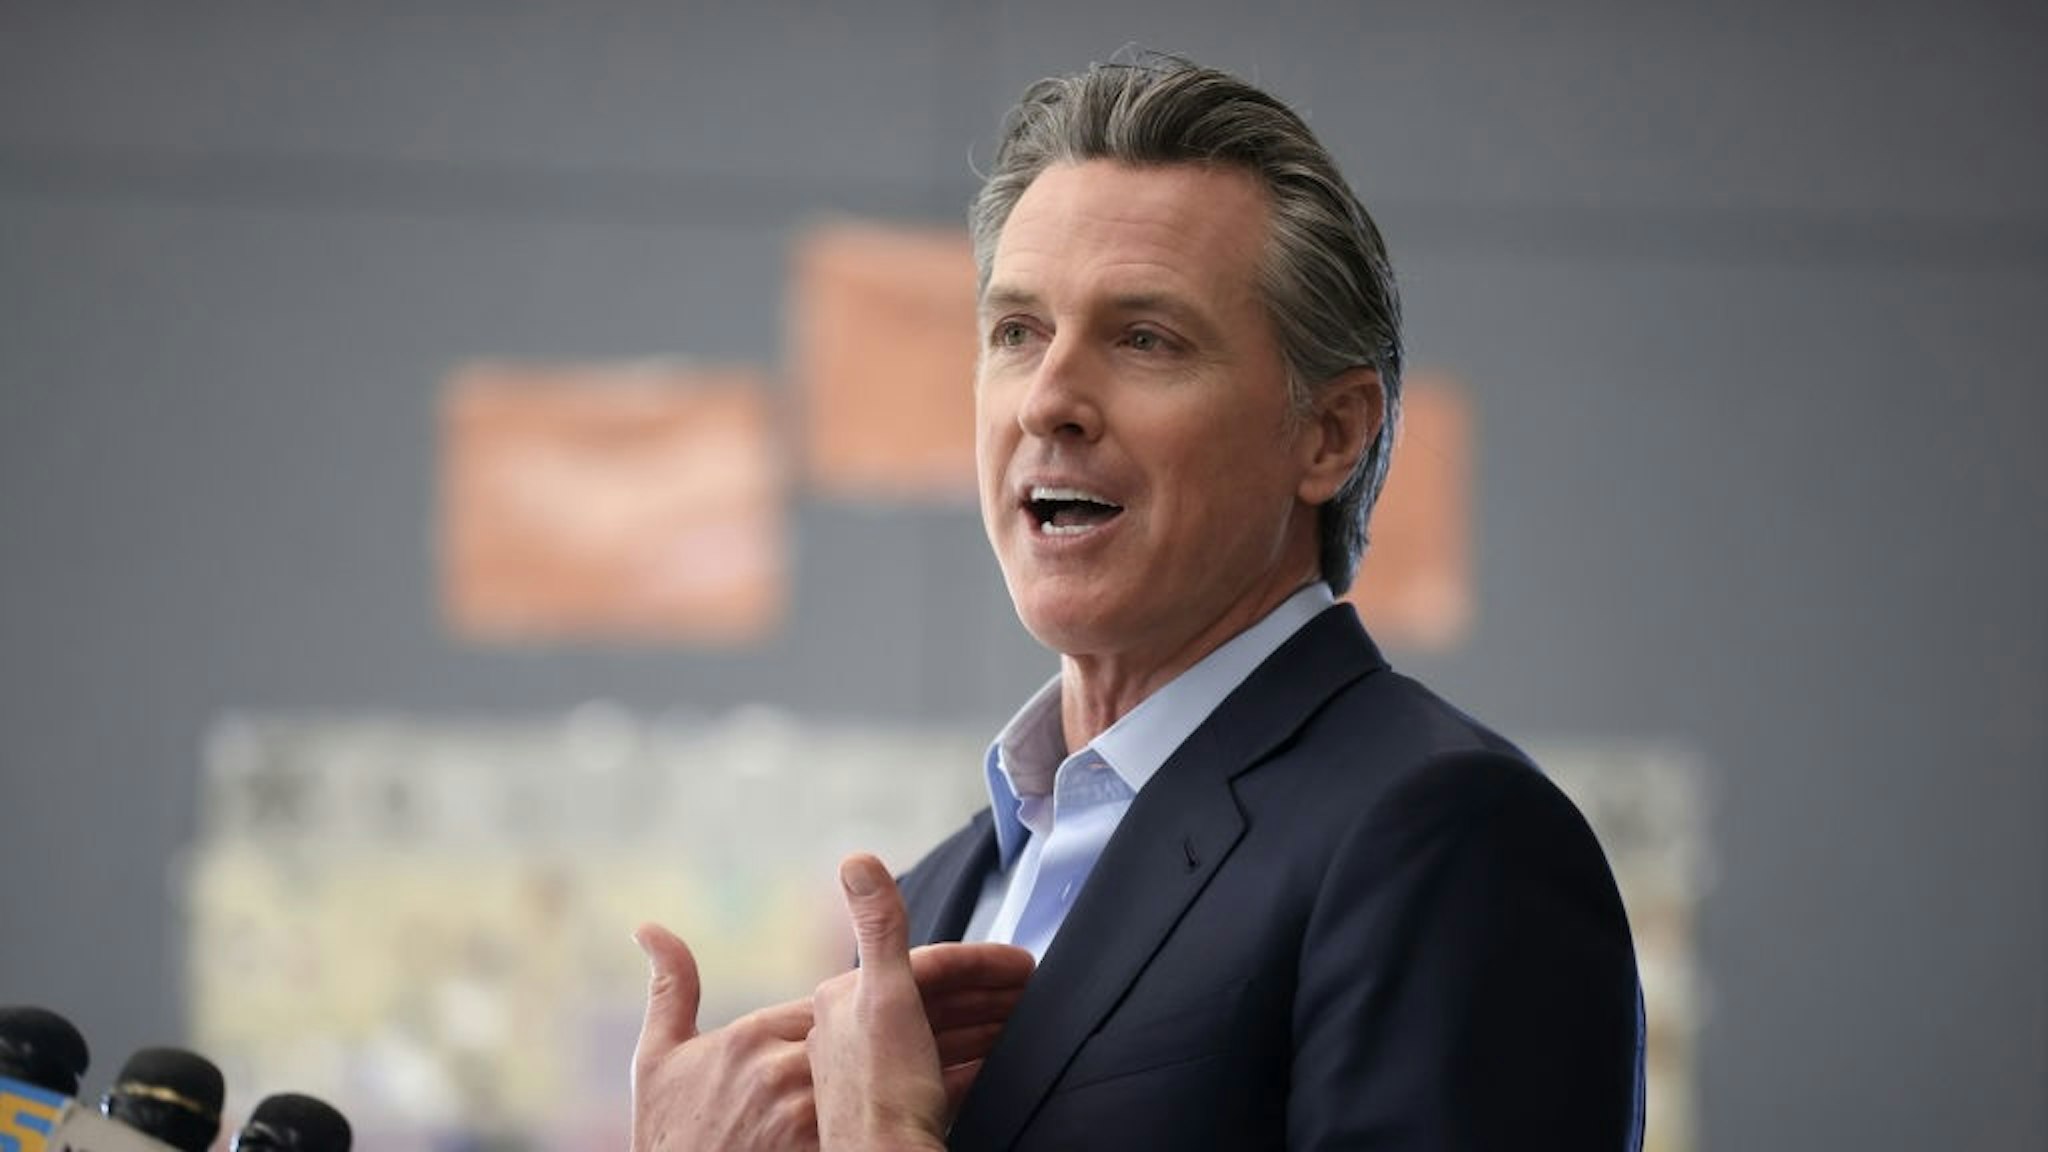 ALAMEDA, CALIFORNIA - MARCH 16: California Gov. Gavin Newsom speaks during a news conference after he toured the newly reopened Ruby Bridges Elementary School on March 16, 2021 in Alameda, California. Gov. Newsom is traveling throughout California to highlight the state's efforts to reopen schools and businesses as he faces the threat of recall. (Photo by Justin Sullivan/Getty Images)